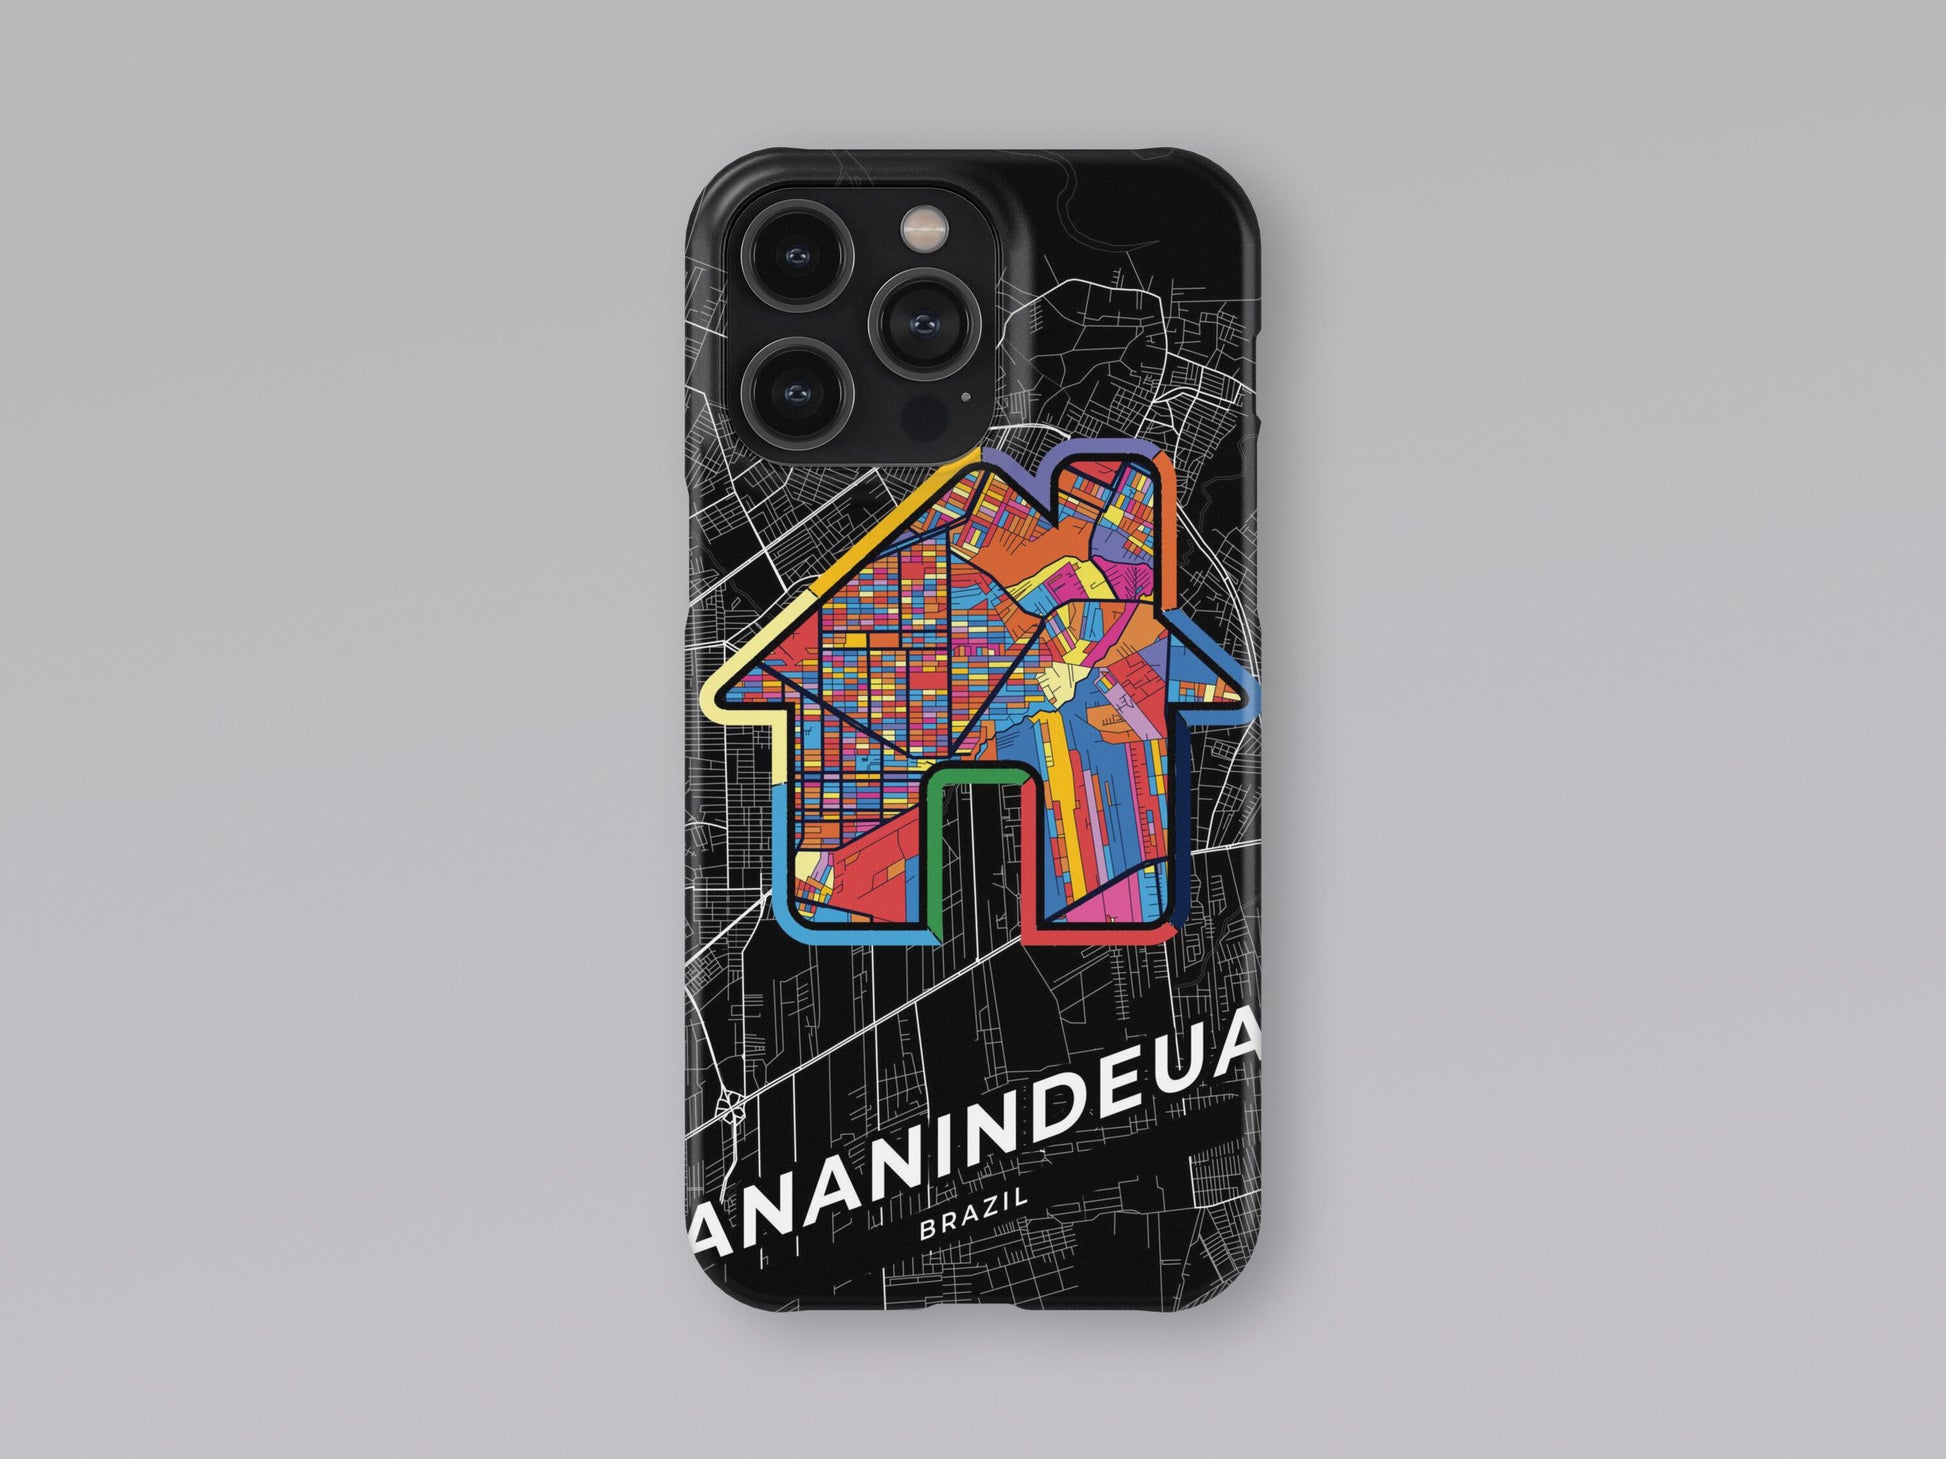 Ananindeua Brazil slim phone case with colorful icon. Birthday, wedding or housewarming gift. Couple match cases. 3